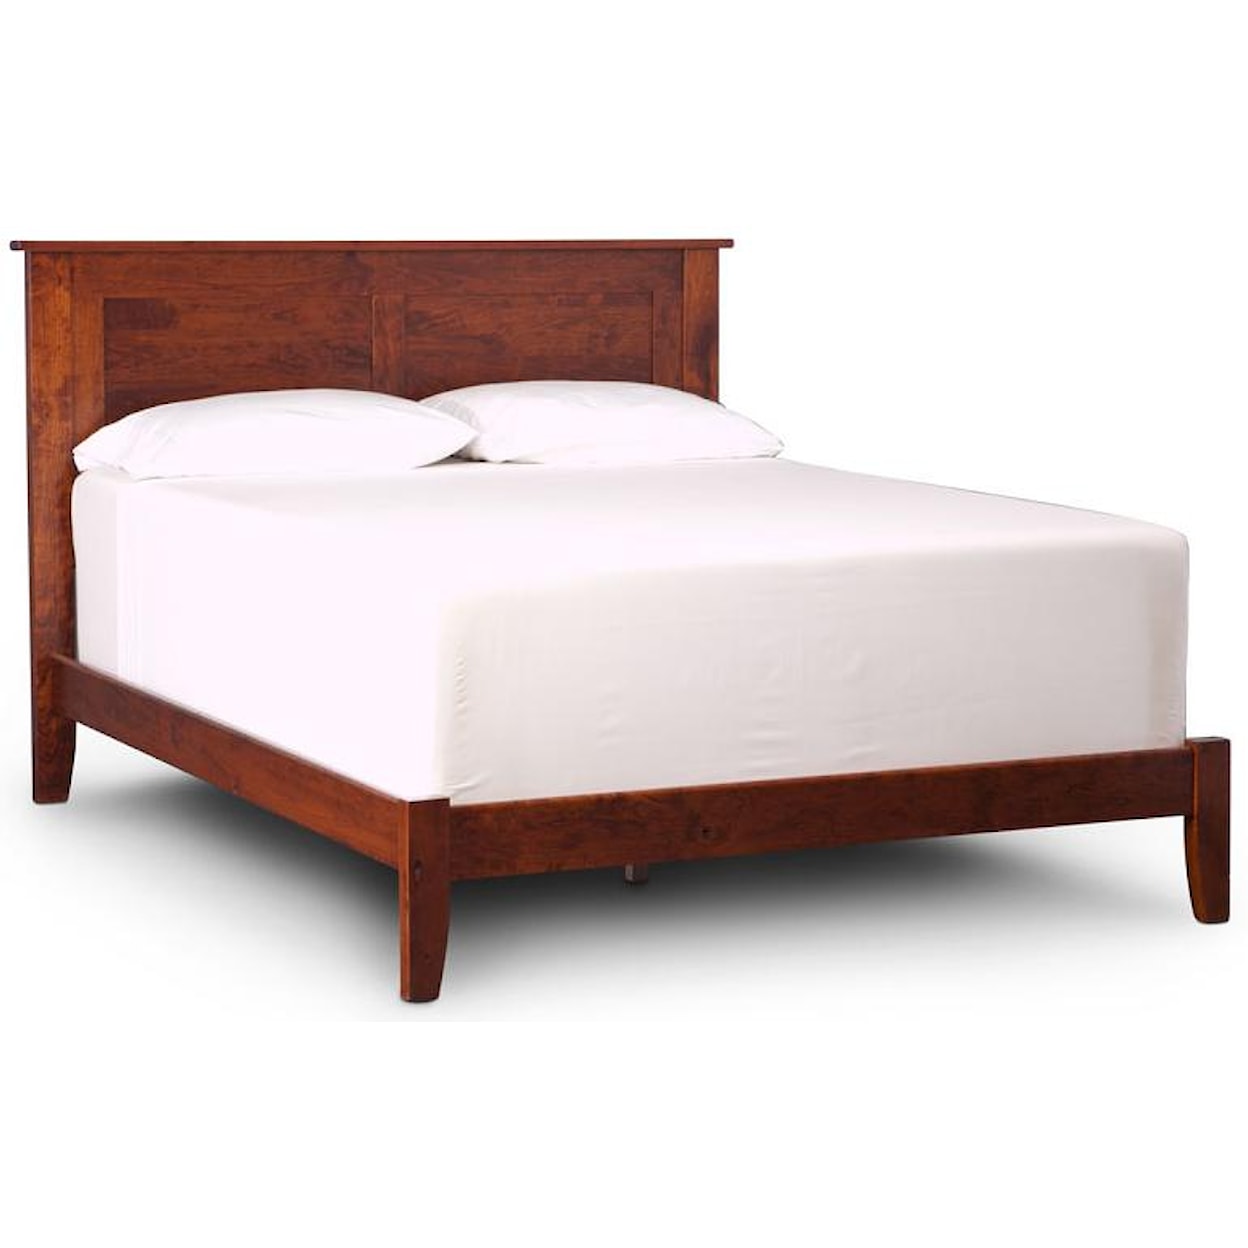 Simply Amish Express Full Shenandoah Express Bed with Wood Frame 